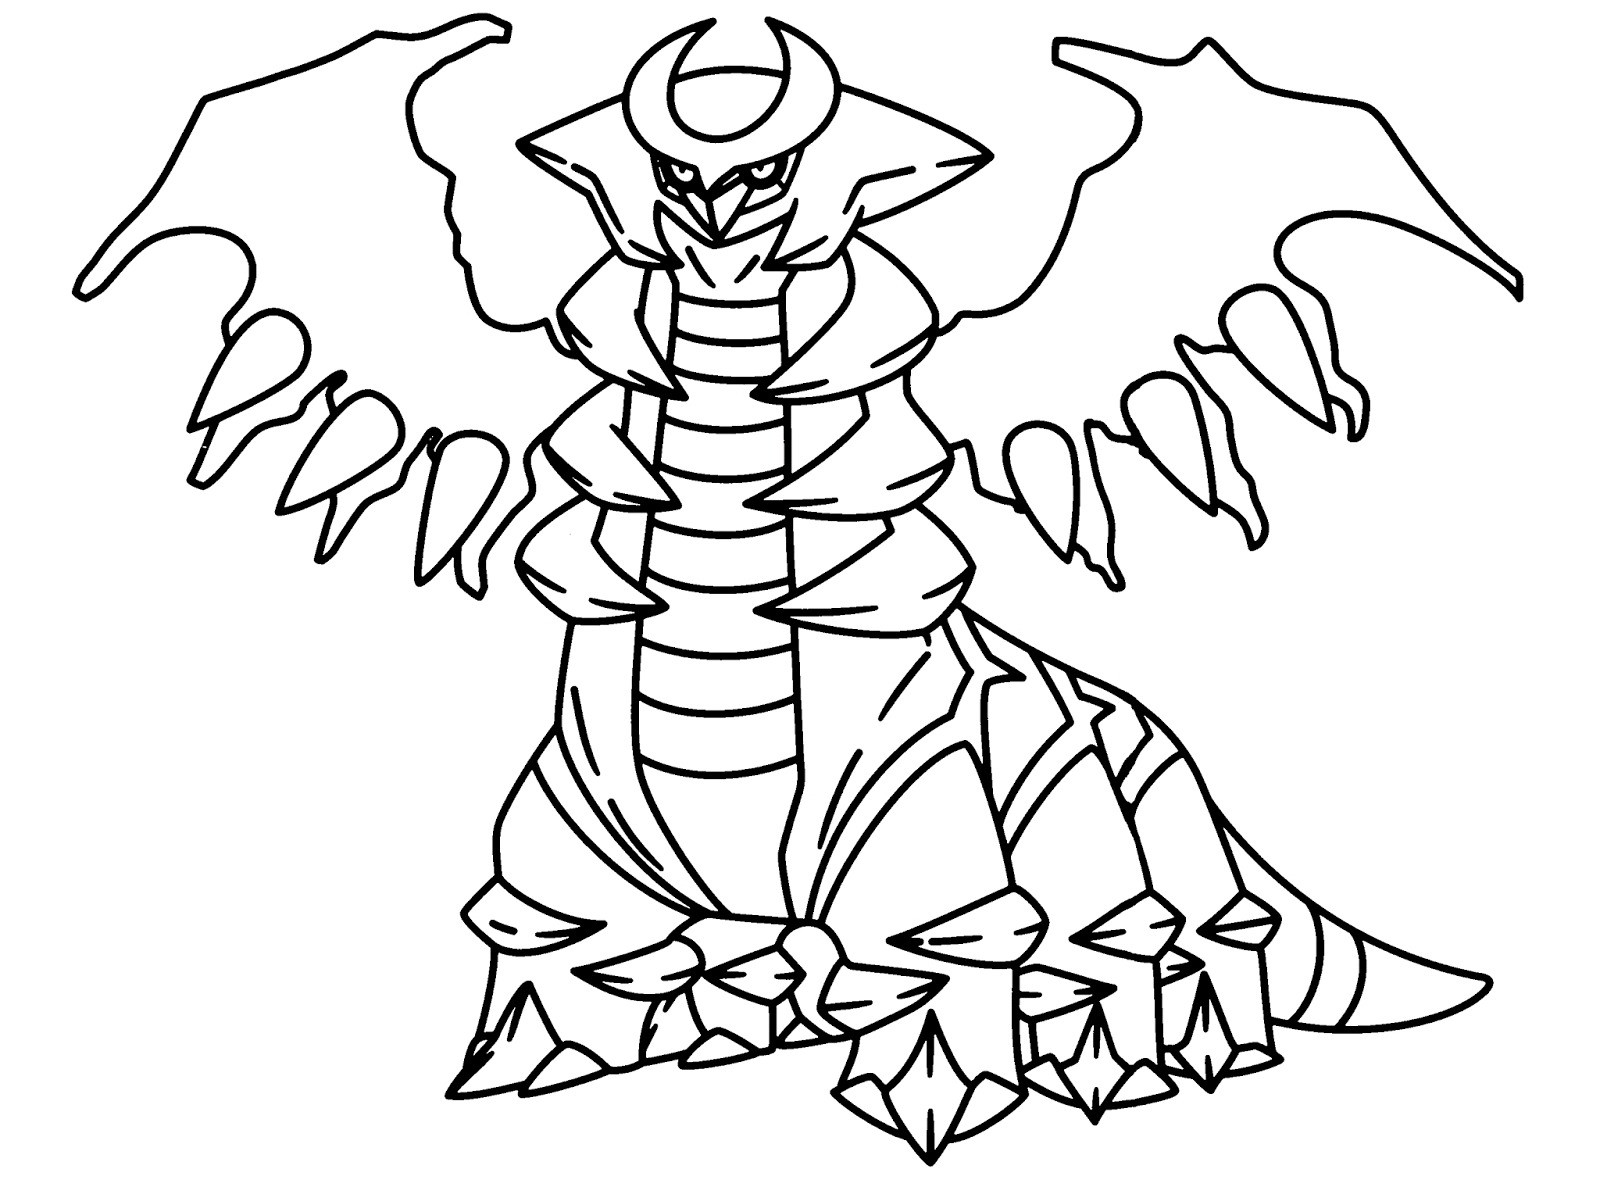 Coloring Pages Pokemon Awesome Pokemon Giratina Coloring Pages Gallery